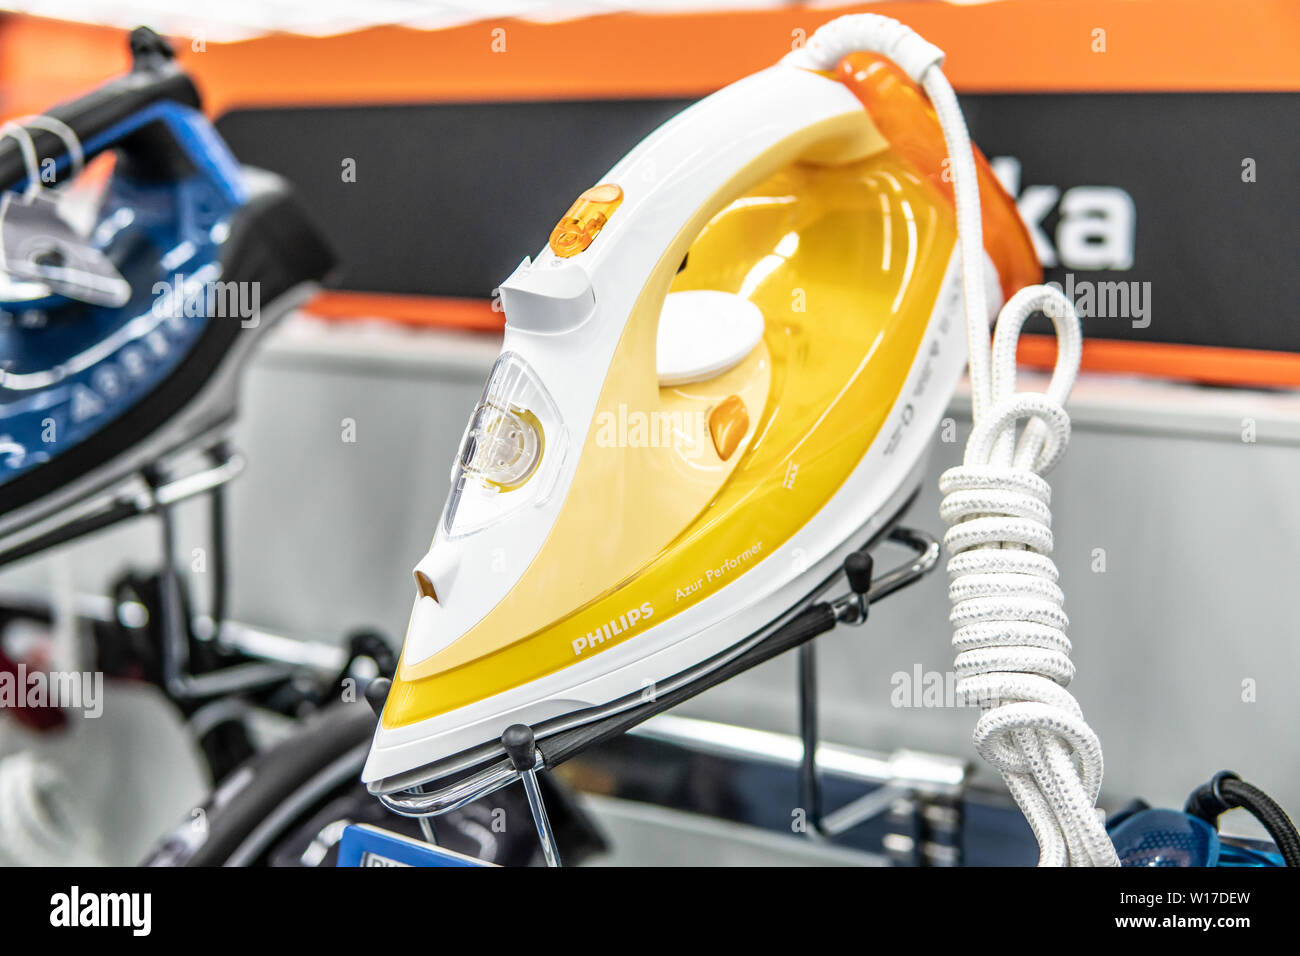 Lodz, Poland, July 9, 2018 inside Saturn electronic store, Philips Azur  Performer Steam iron for ironing, Anti-calc, SteamGlide Plus soleplate  Stock Photo - Alamy